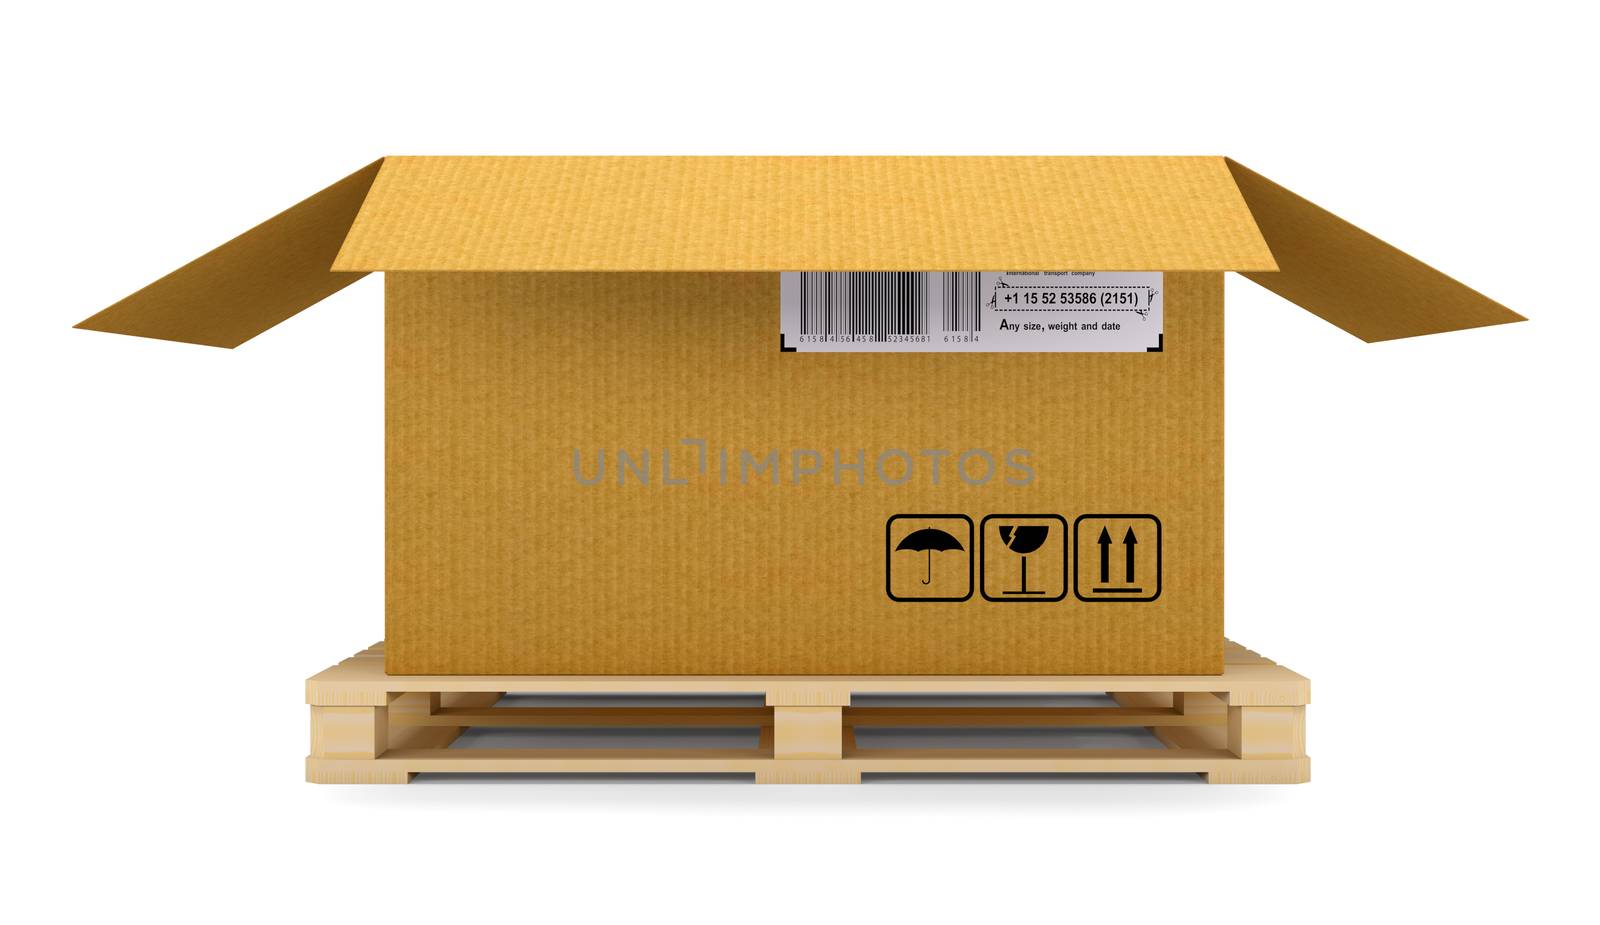 Opened cardboard transportation box on wooden pallete. Isolated on white. 3D illustration